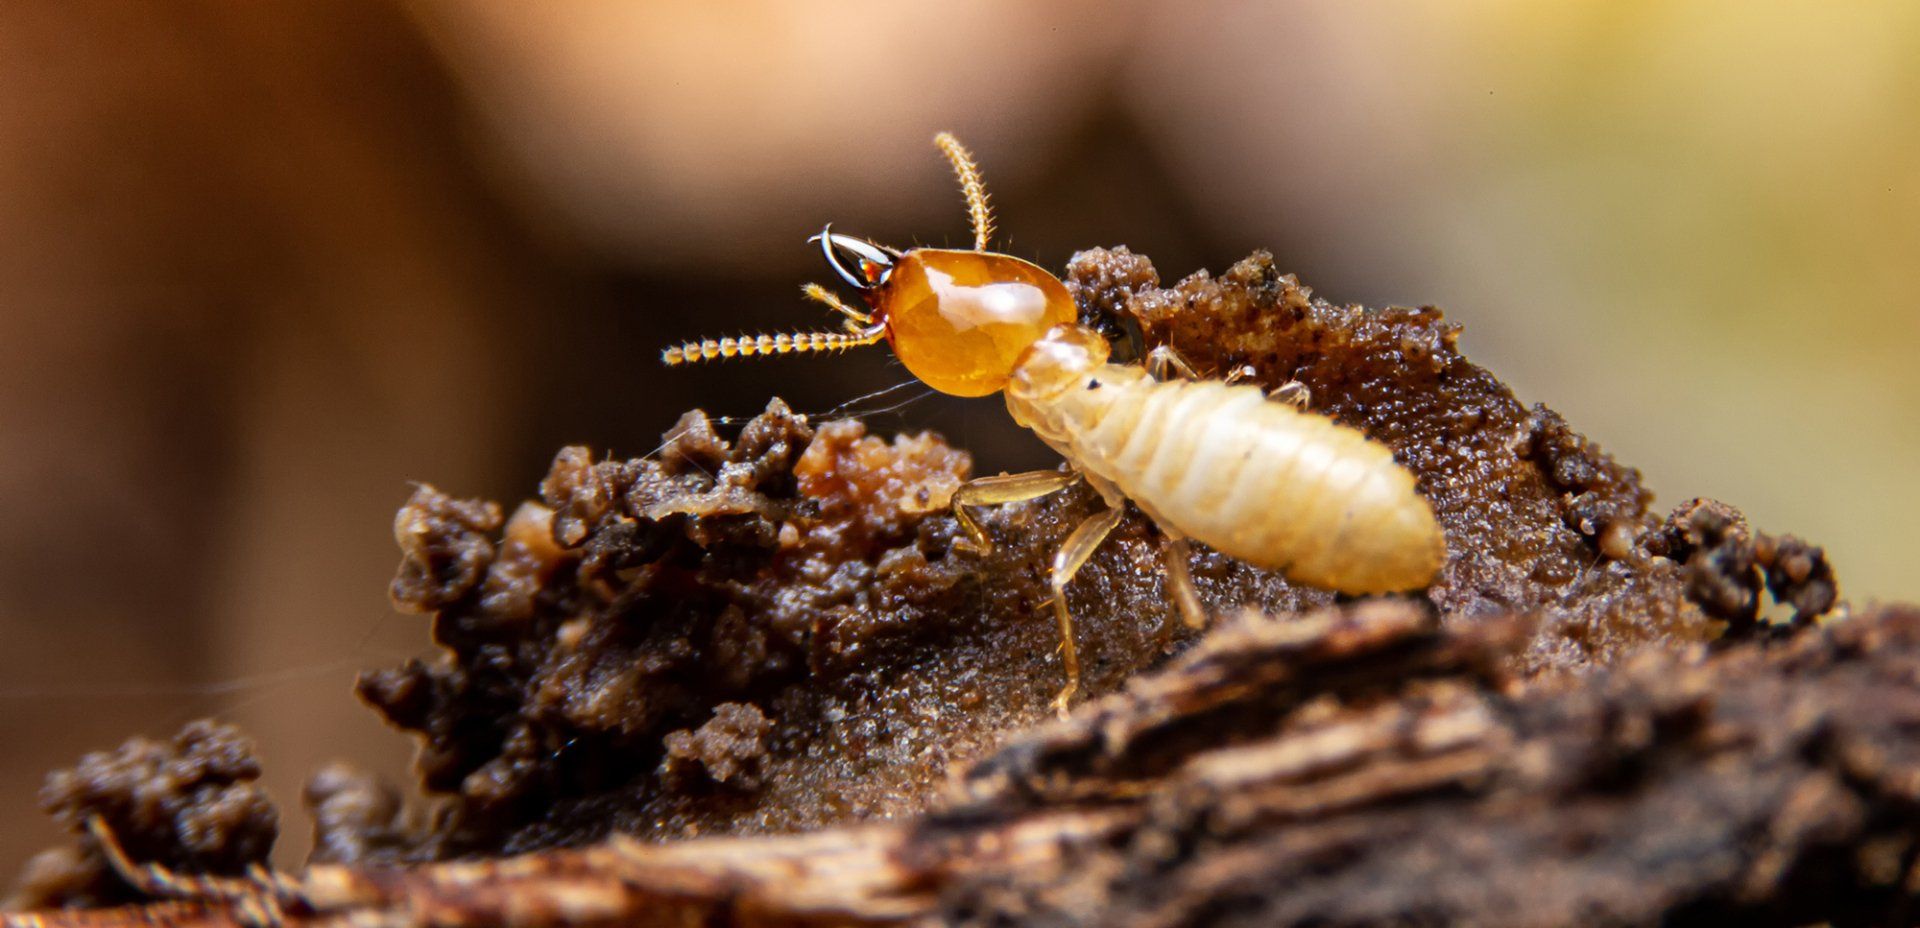 Call Steve's Pest Control for Effective Termite Treatment in Mid-Missouri